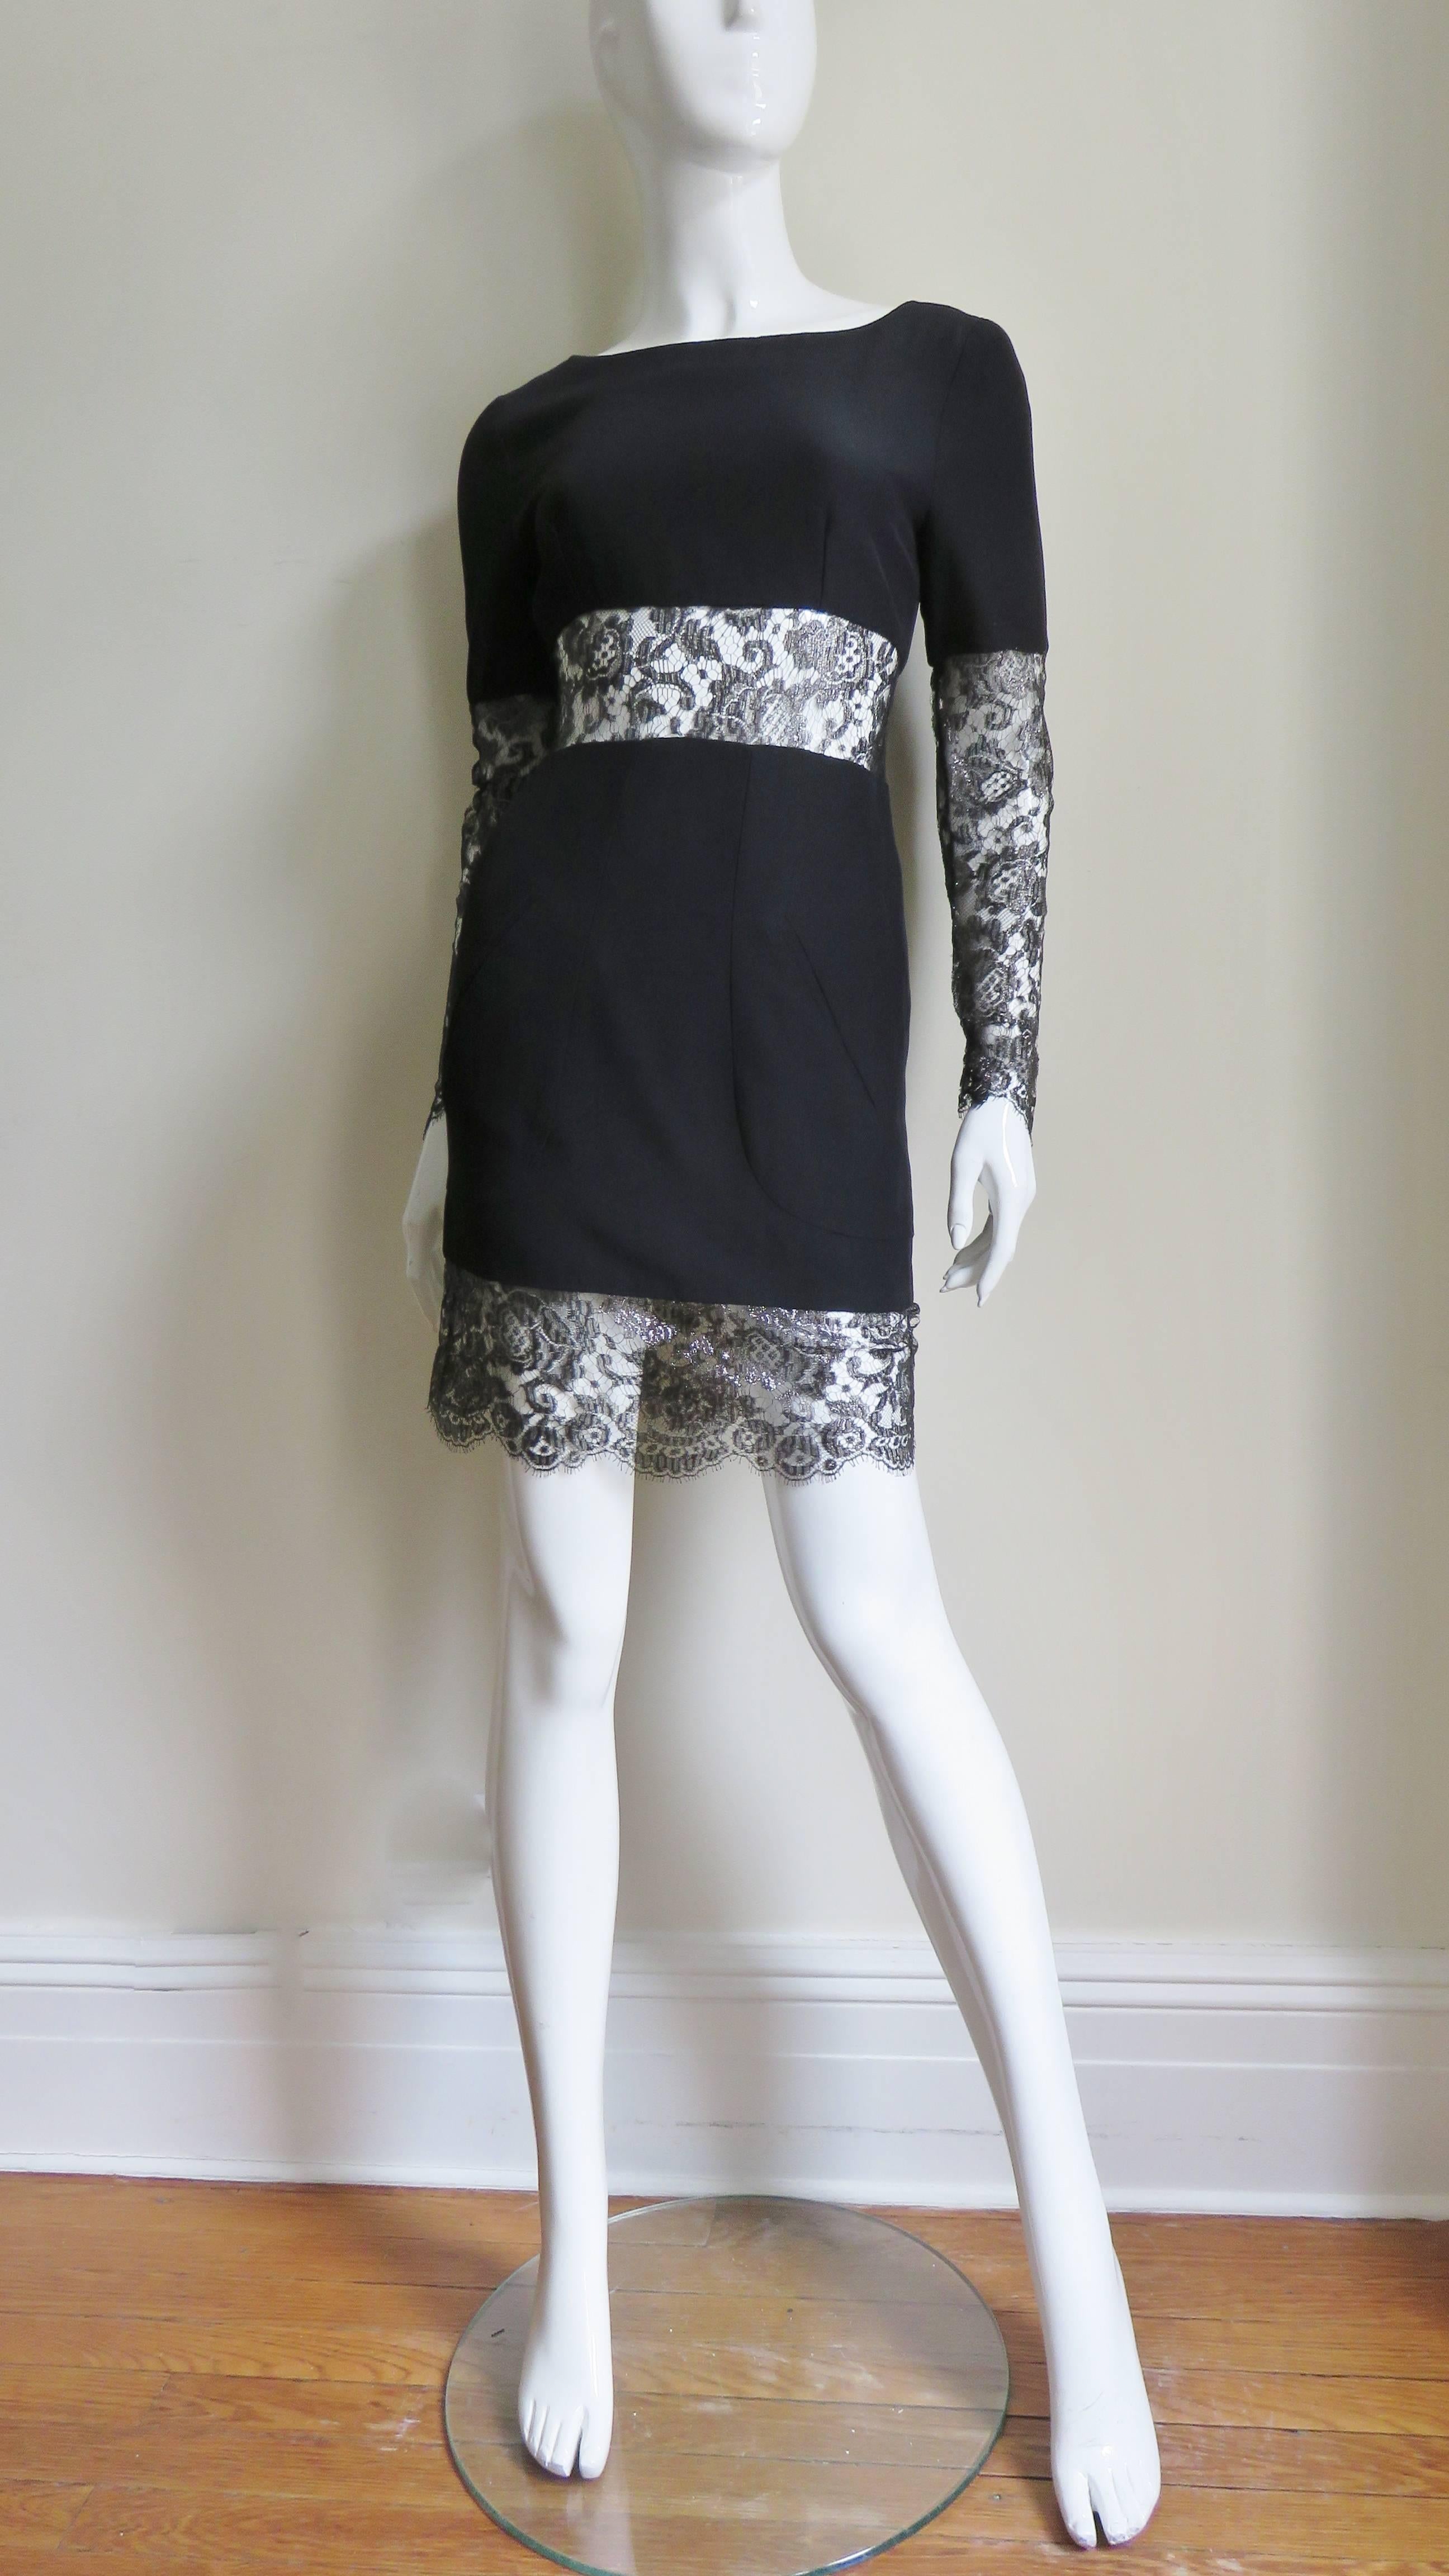 Karl Lagerfeld Silk Dress with Lace Cut outs  In Good Condition For Sale In Water Mill, NY